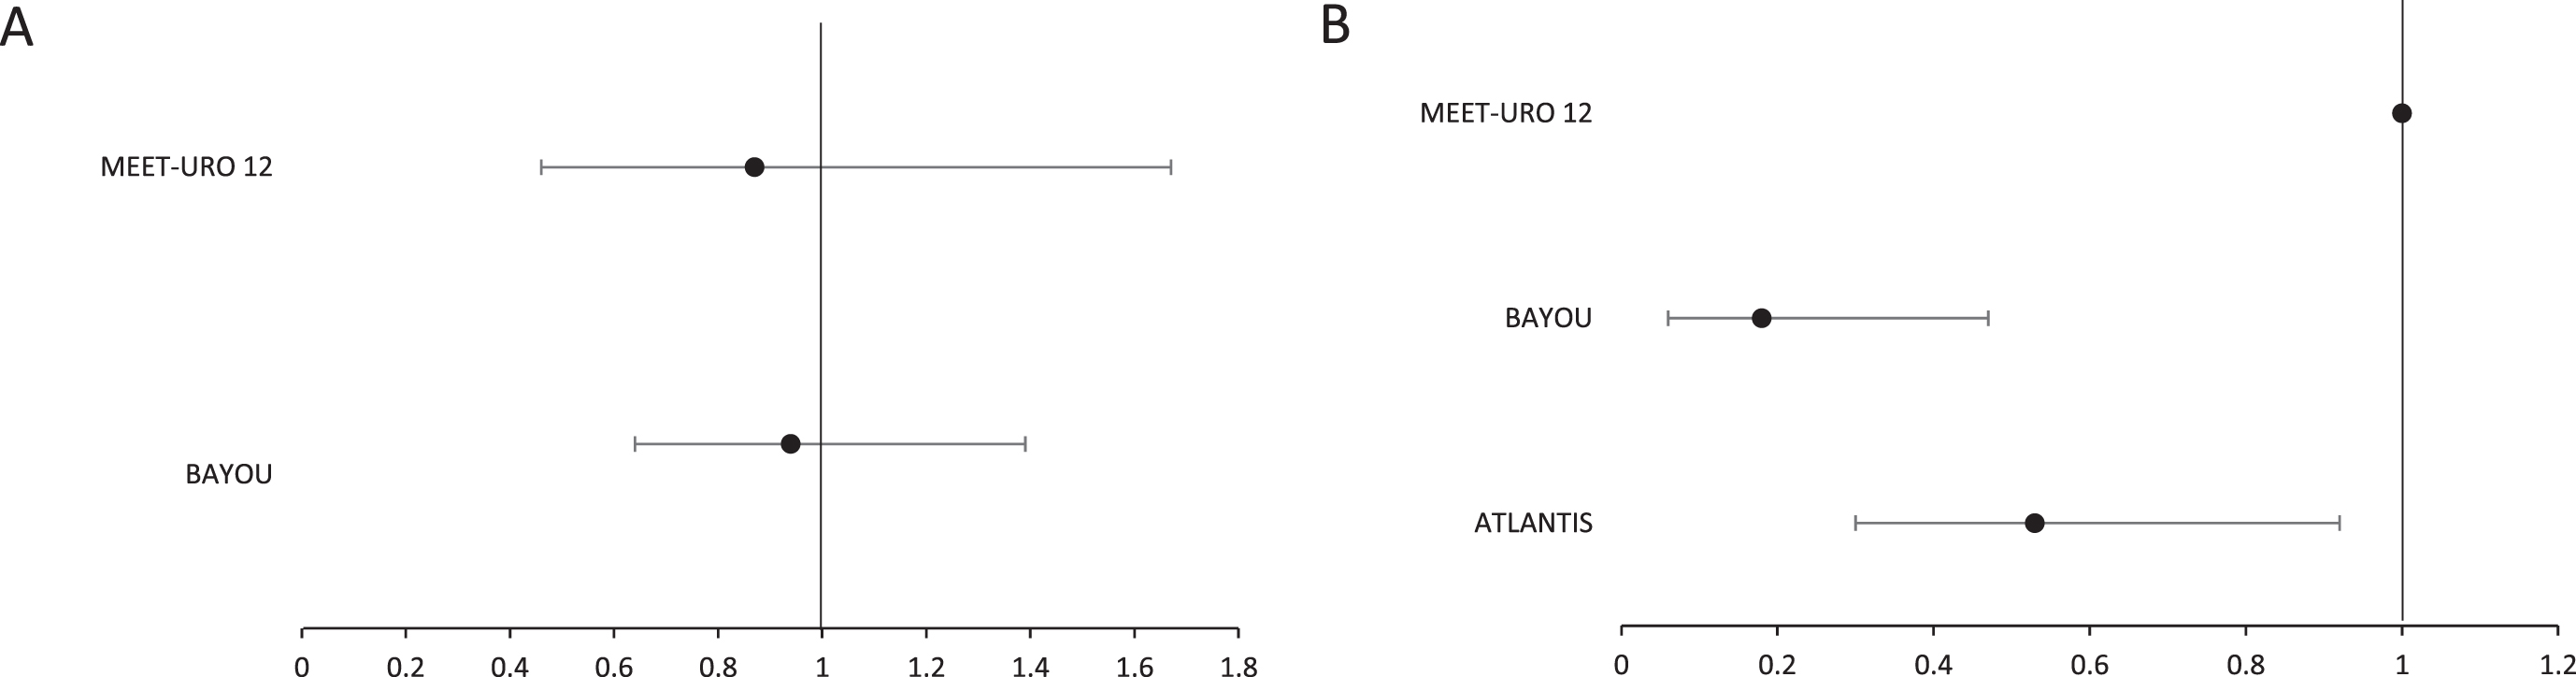 Forest plot for hazard ratios and confidence intervals for selected studies for (A) unselected patients and (B) patients selected for the presence of a DNA repair gene defective phenotype. Note: the indicated confidence intervals are as reported for the respective trials. For Meet-URO12 and BAYOU this was set at 95%. For ATLANTIS this was set at 80%.